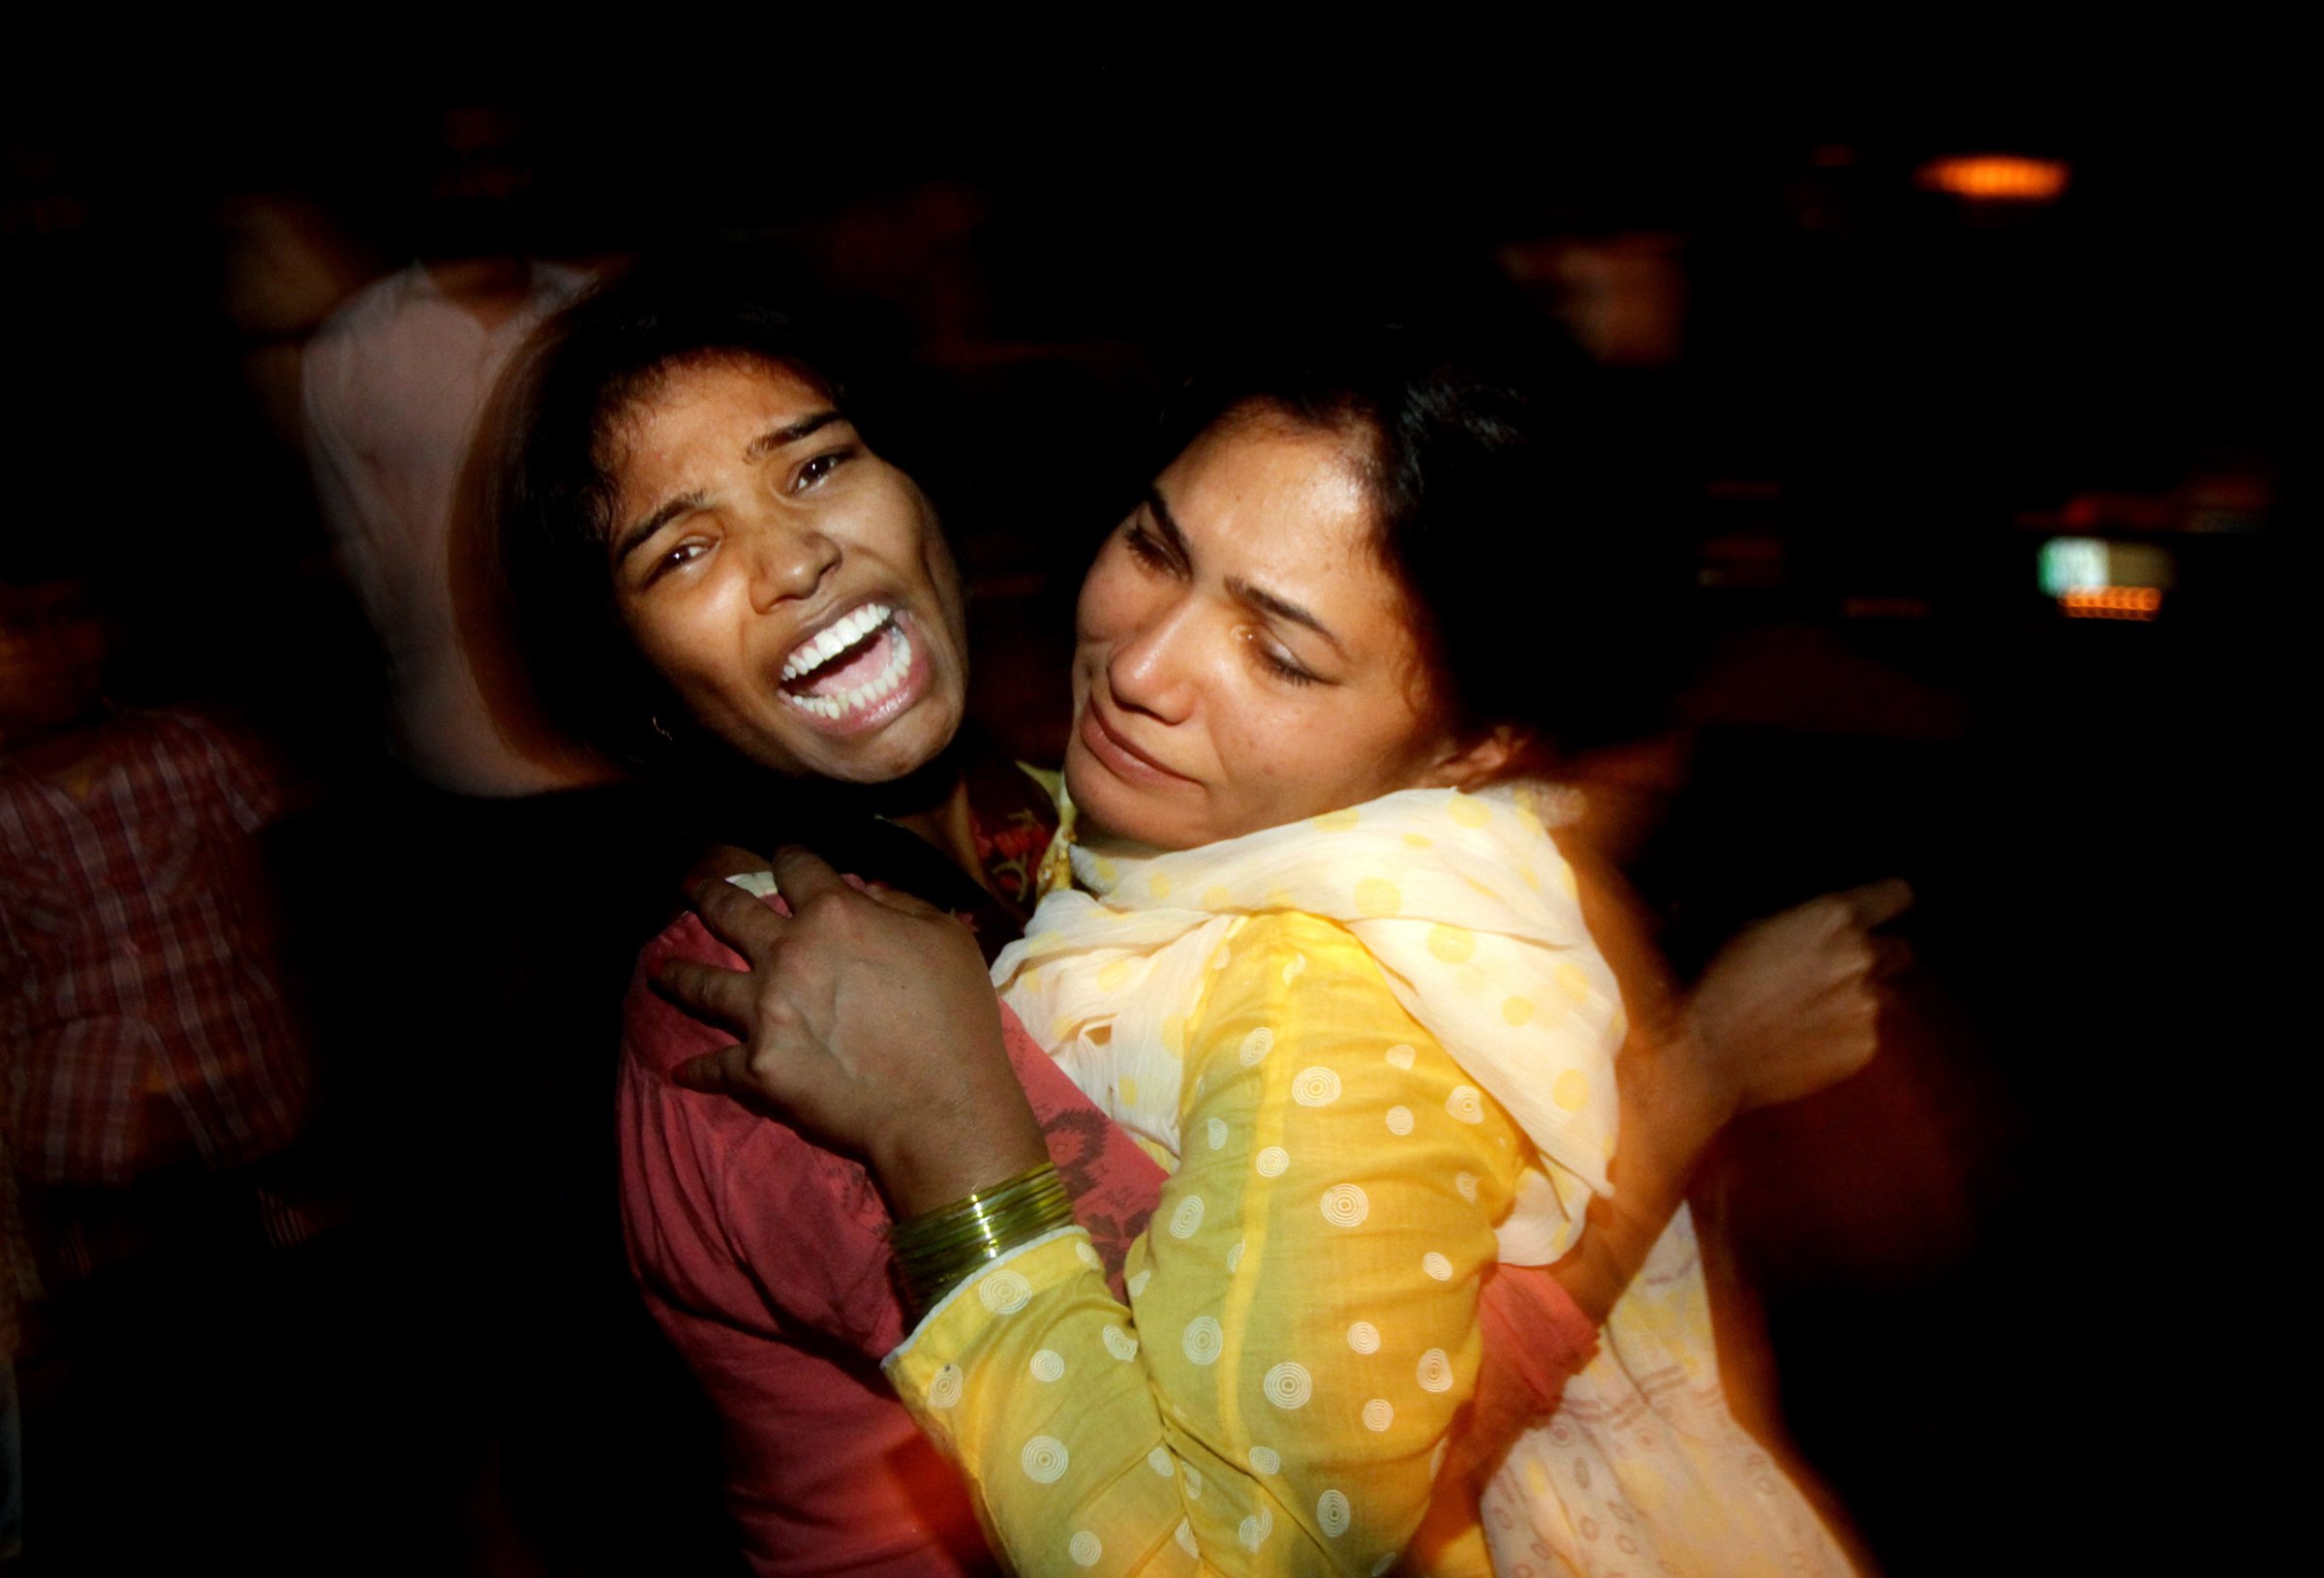 Women comfort each other as they mourn over the death of a family member who was killed in a bomb blast, at a local hospital in Lahore, Pakistan, Sunday, March, 27, 2016. A bomb blast in a park in the eastern Pakistani city of Lahore has killed tens of people and wounded scores, a health official said. (AP Photo/K.M. Chuadary)